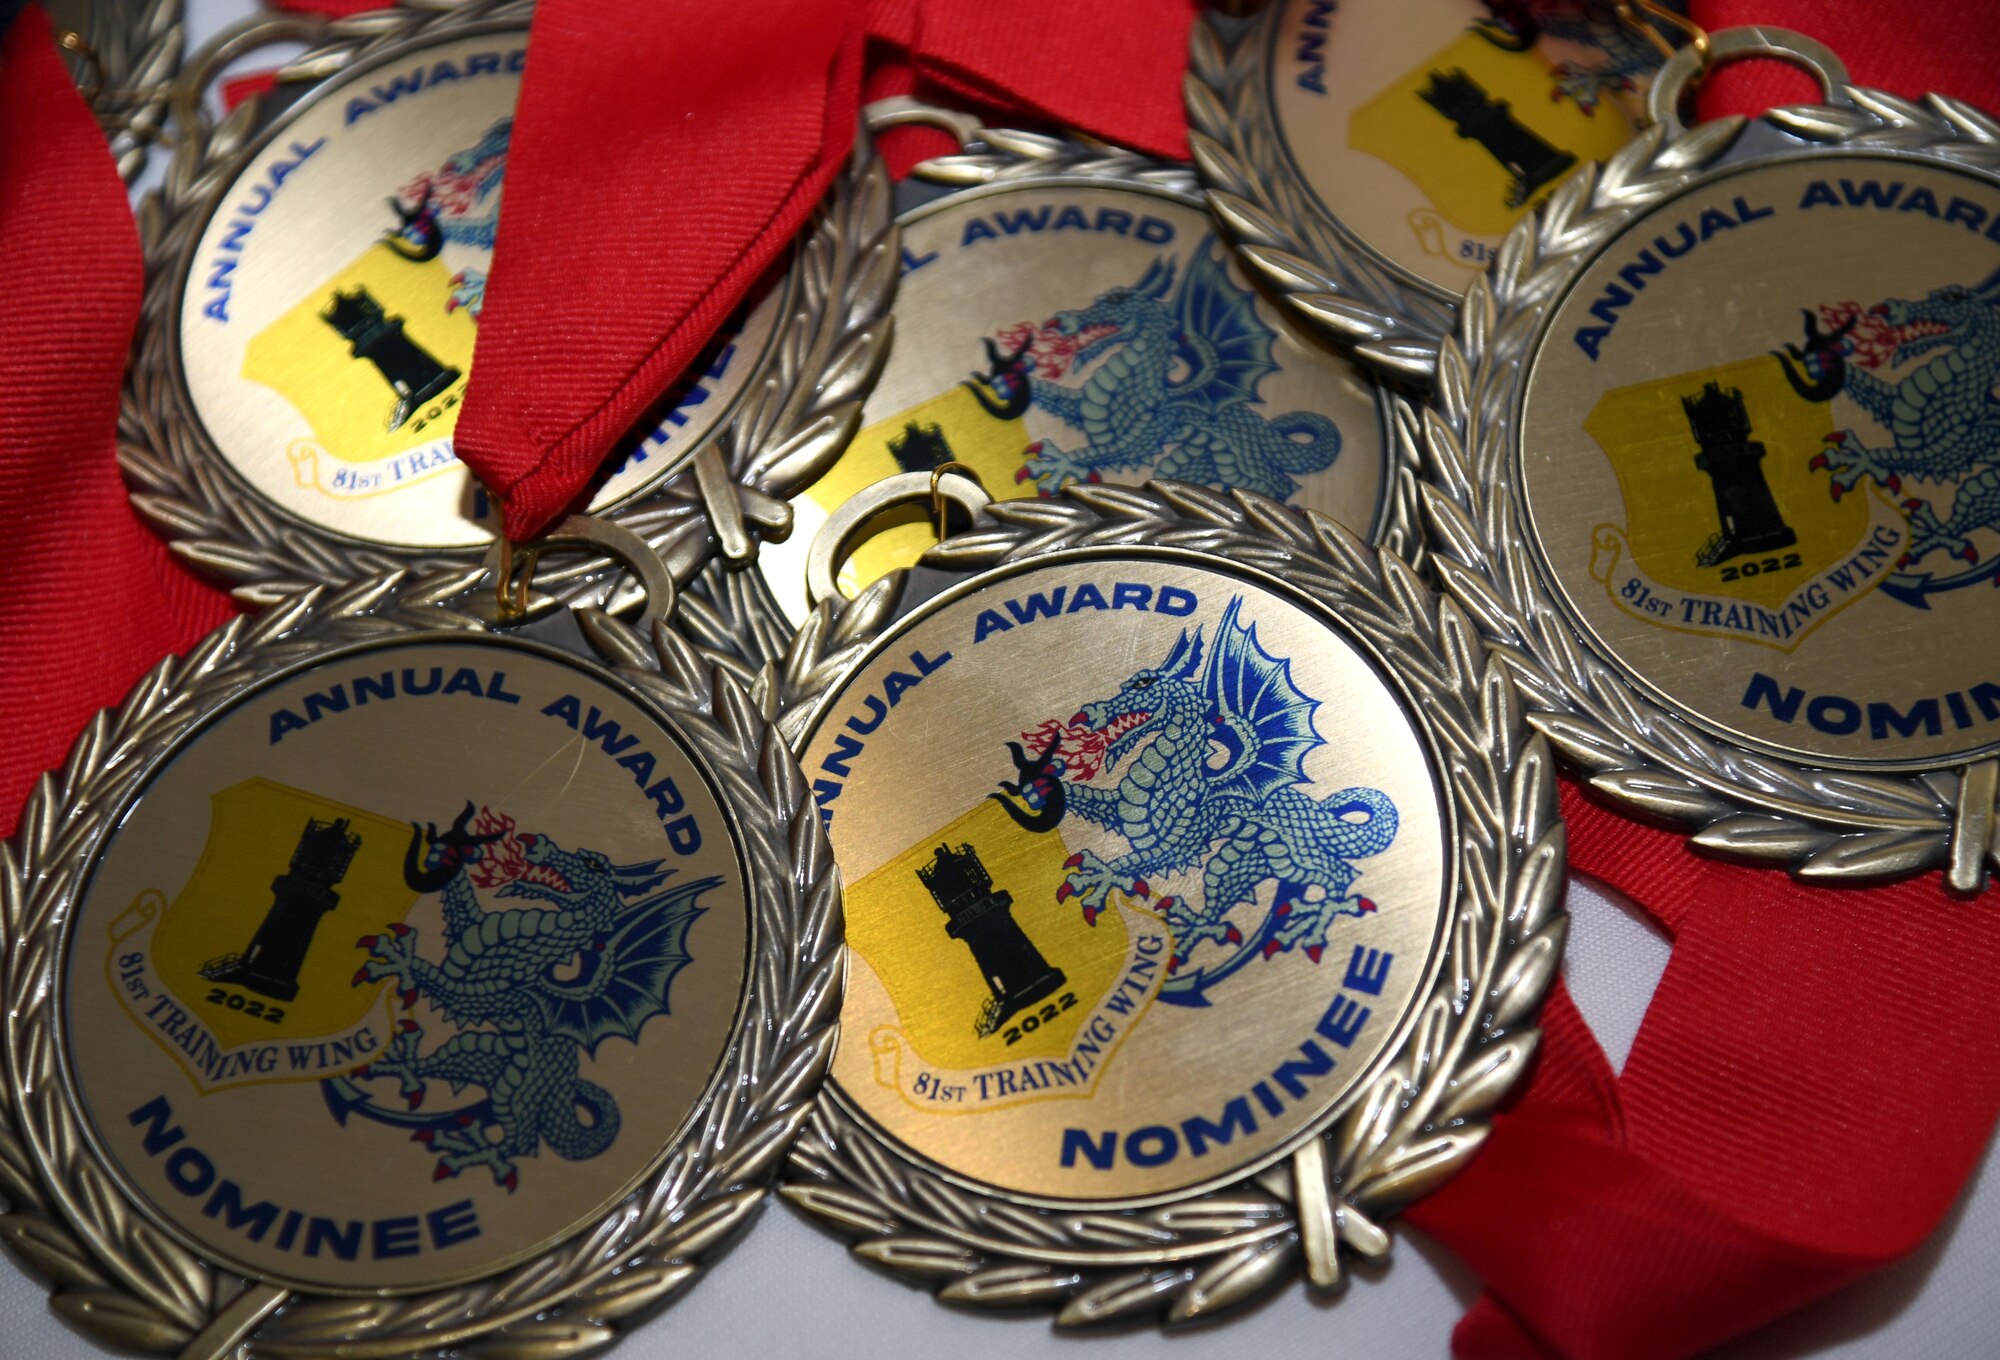 Medallions are on display during the 81st Training Wing's 2022 Annual Awards Ceremony inside the Bay Breeze Event Center at Keesler Air Force Base, Mississippi, Feb. 24, 2023.